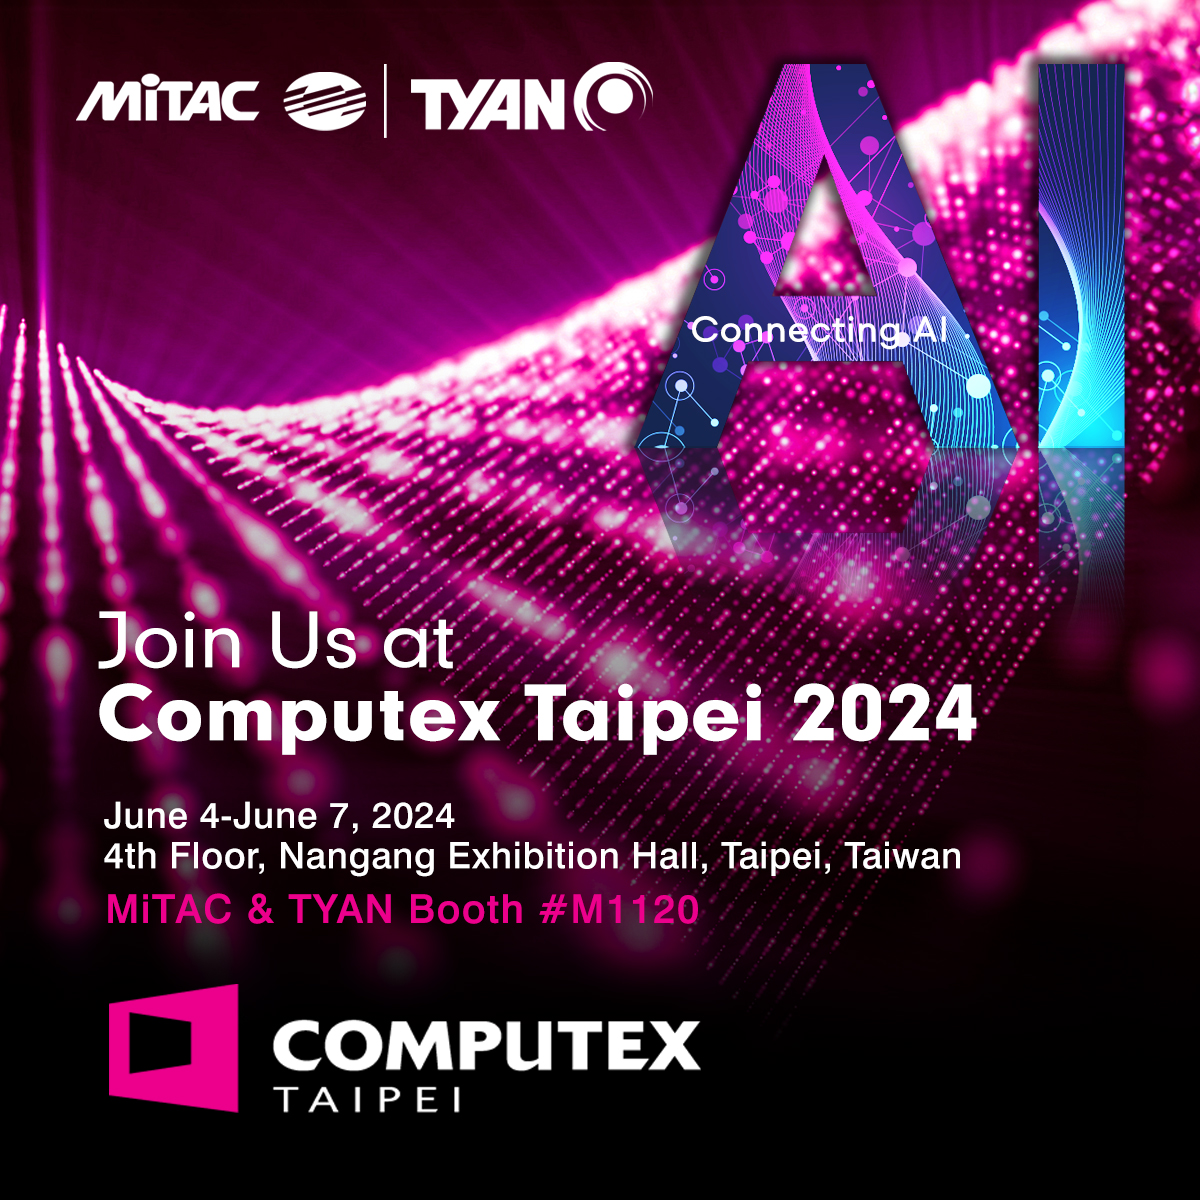 📣Join us at #Computex 2024 📣
From June 4-7 in Taipei, We & @tyan  will showcase our server solutions and #DSG products!

🗓️ Date: June 04-07, 2024
📍 Location: 4th Floor, Nangang Exhibition Hall, Taipei, Taiwan
🔎Booth: #M1120

#Computex2024 #Server #Intel #AMD #AI #HPC